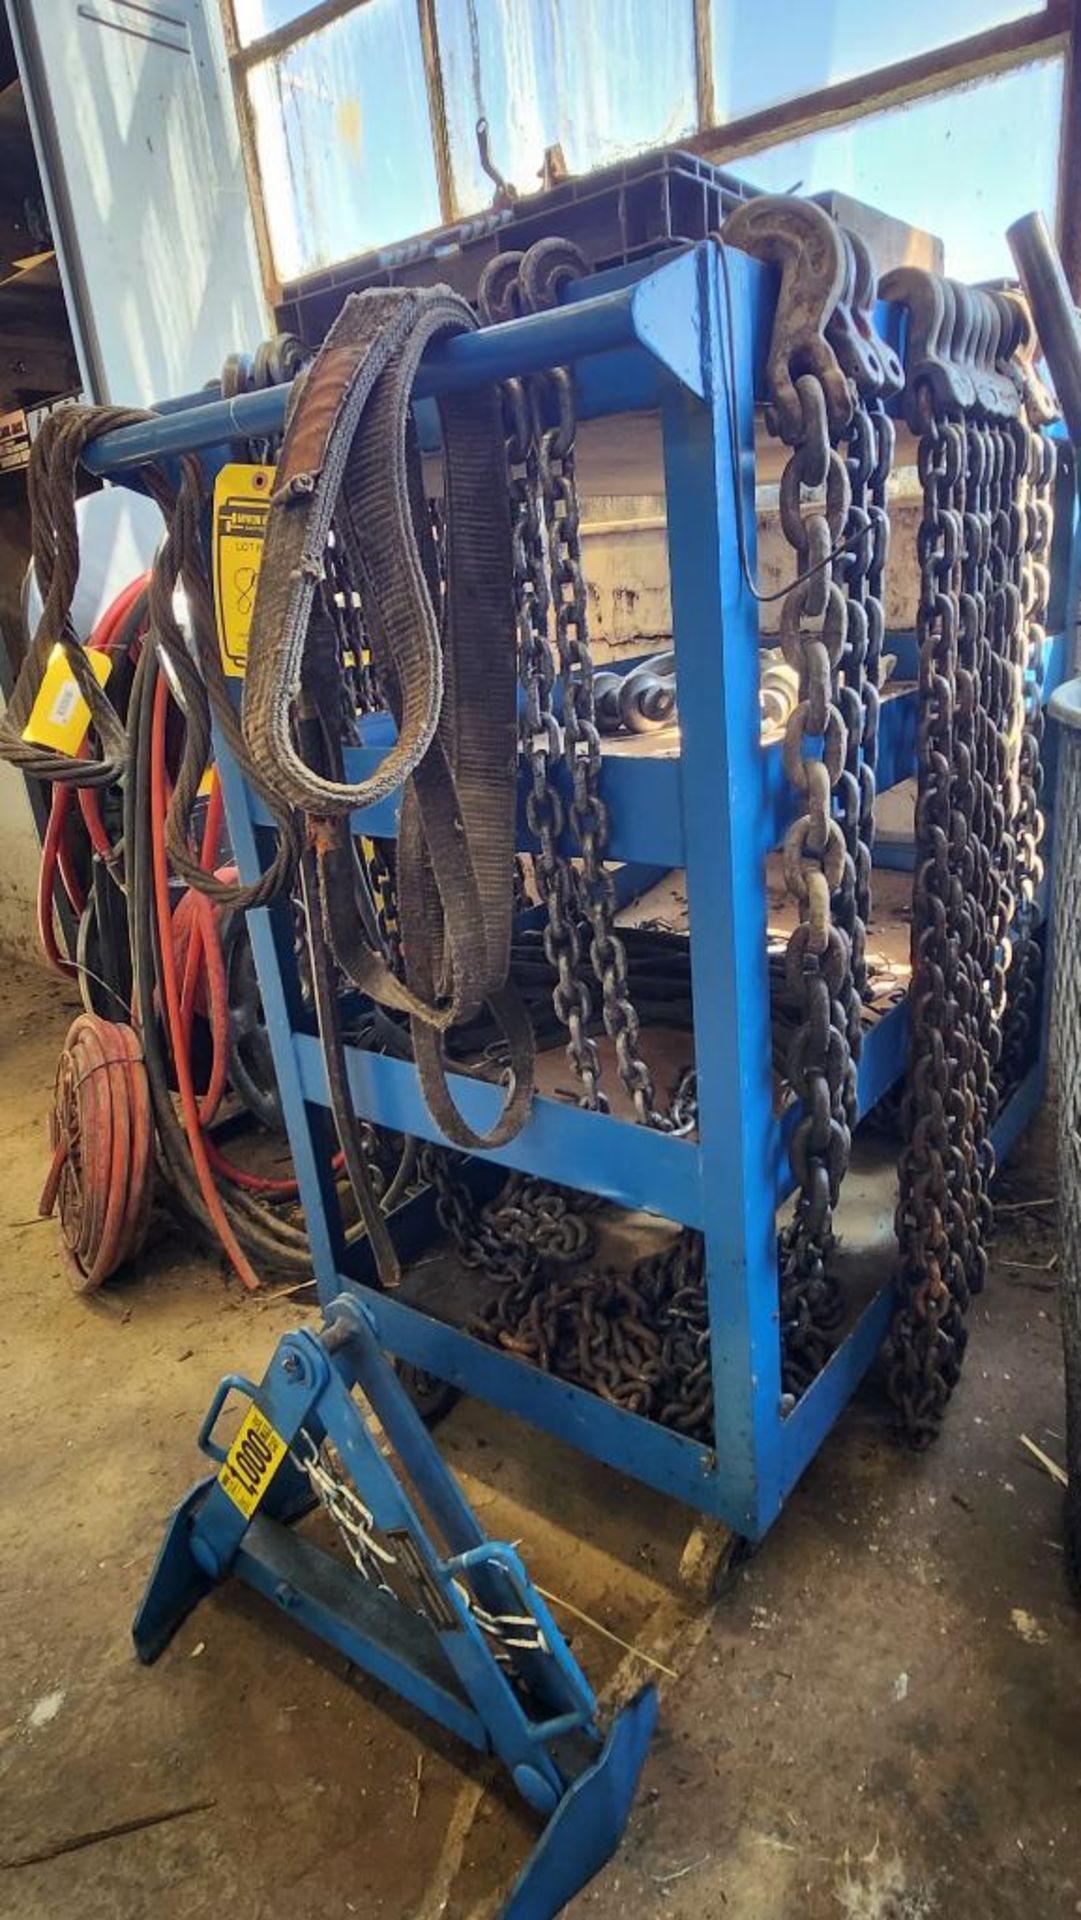 Steel Shop Cart w/ Content of Rigging Chains, Hooks, Eyebolts, Shackles, Rigging Harnesses - Image 4 of 5